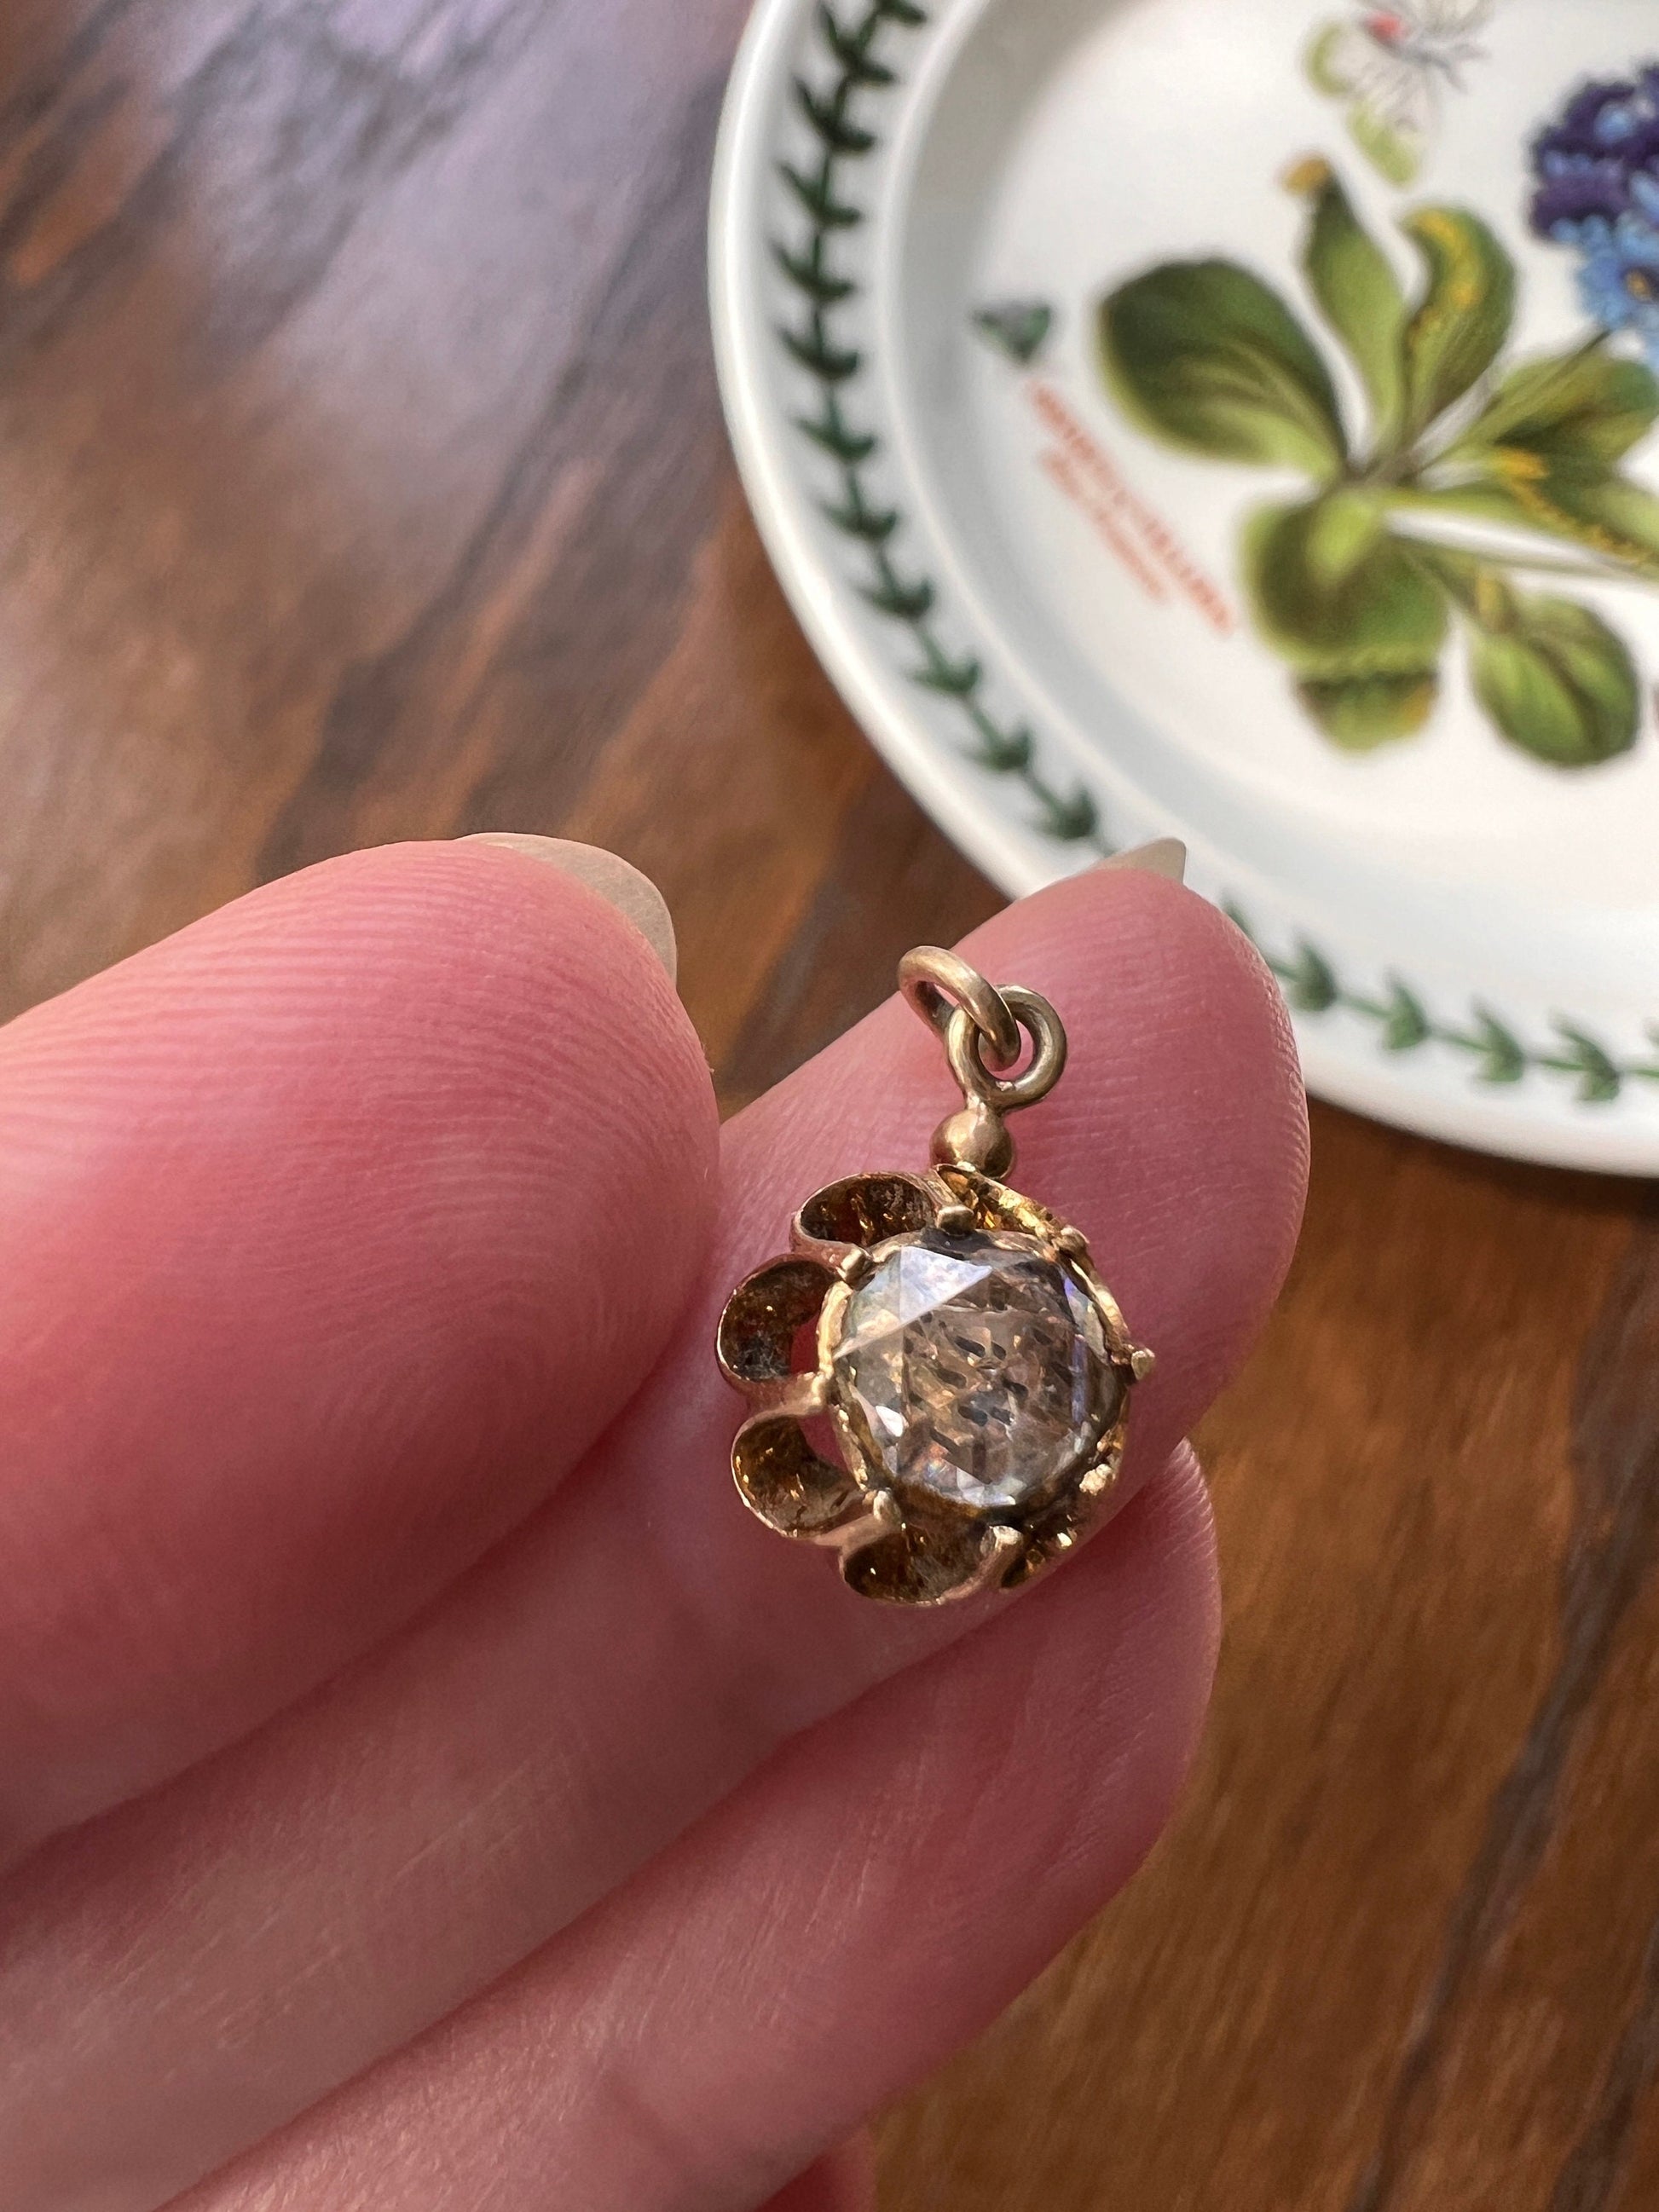 Rose Cut DIAMOND Drop Pendant 18k Gold Solid Crown Prong Domed Foil Back Dainty Solitaire French Georgian Victorian Necklace Charm Love Gift